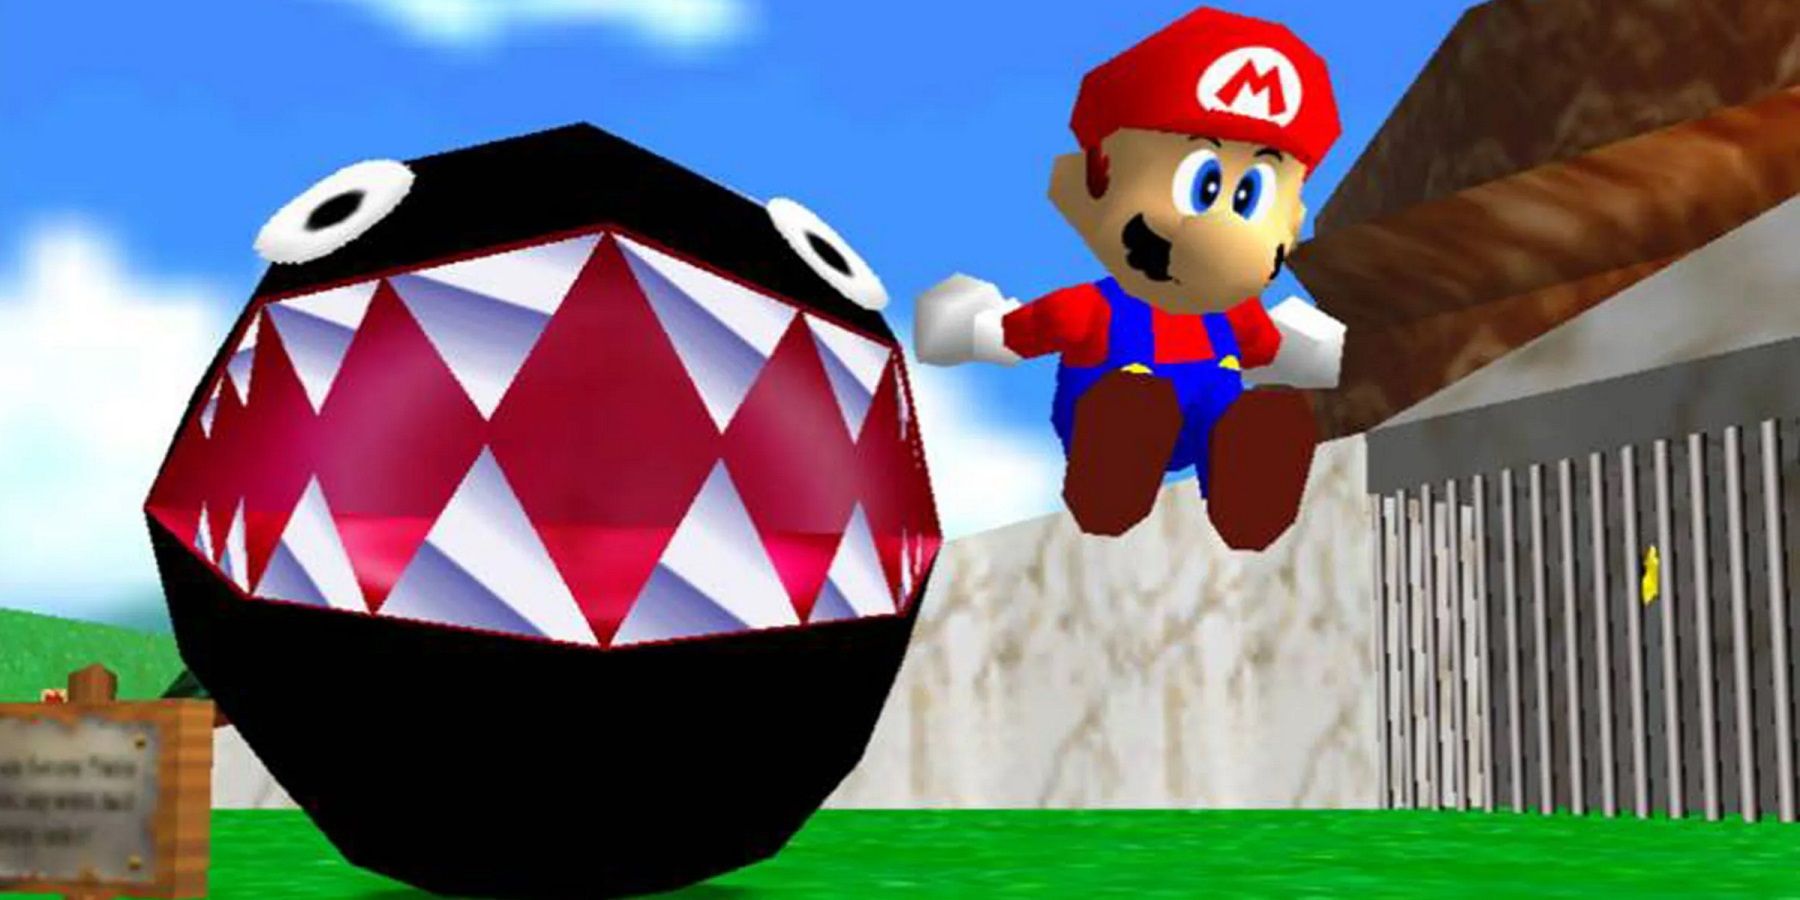 Screenshot from Super Mario 64 showing Mario leaping away from a Chain Chomp.